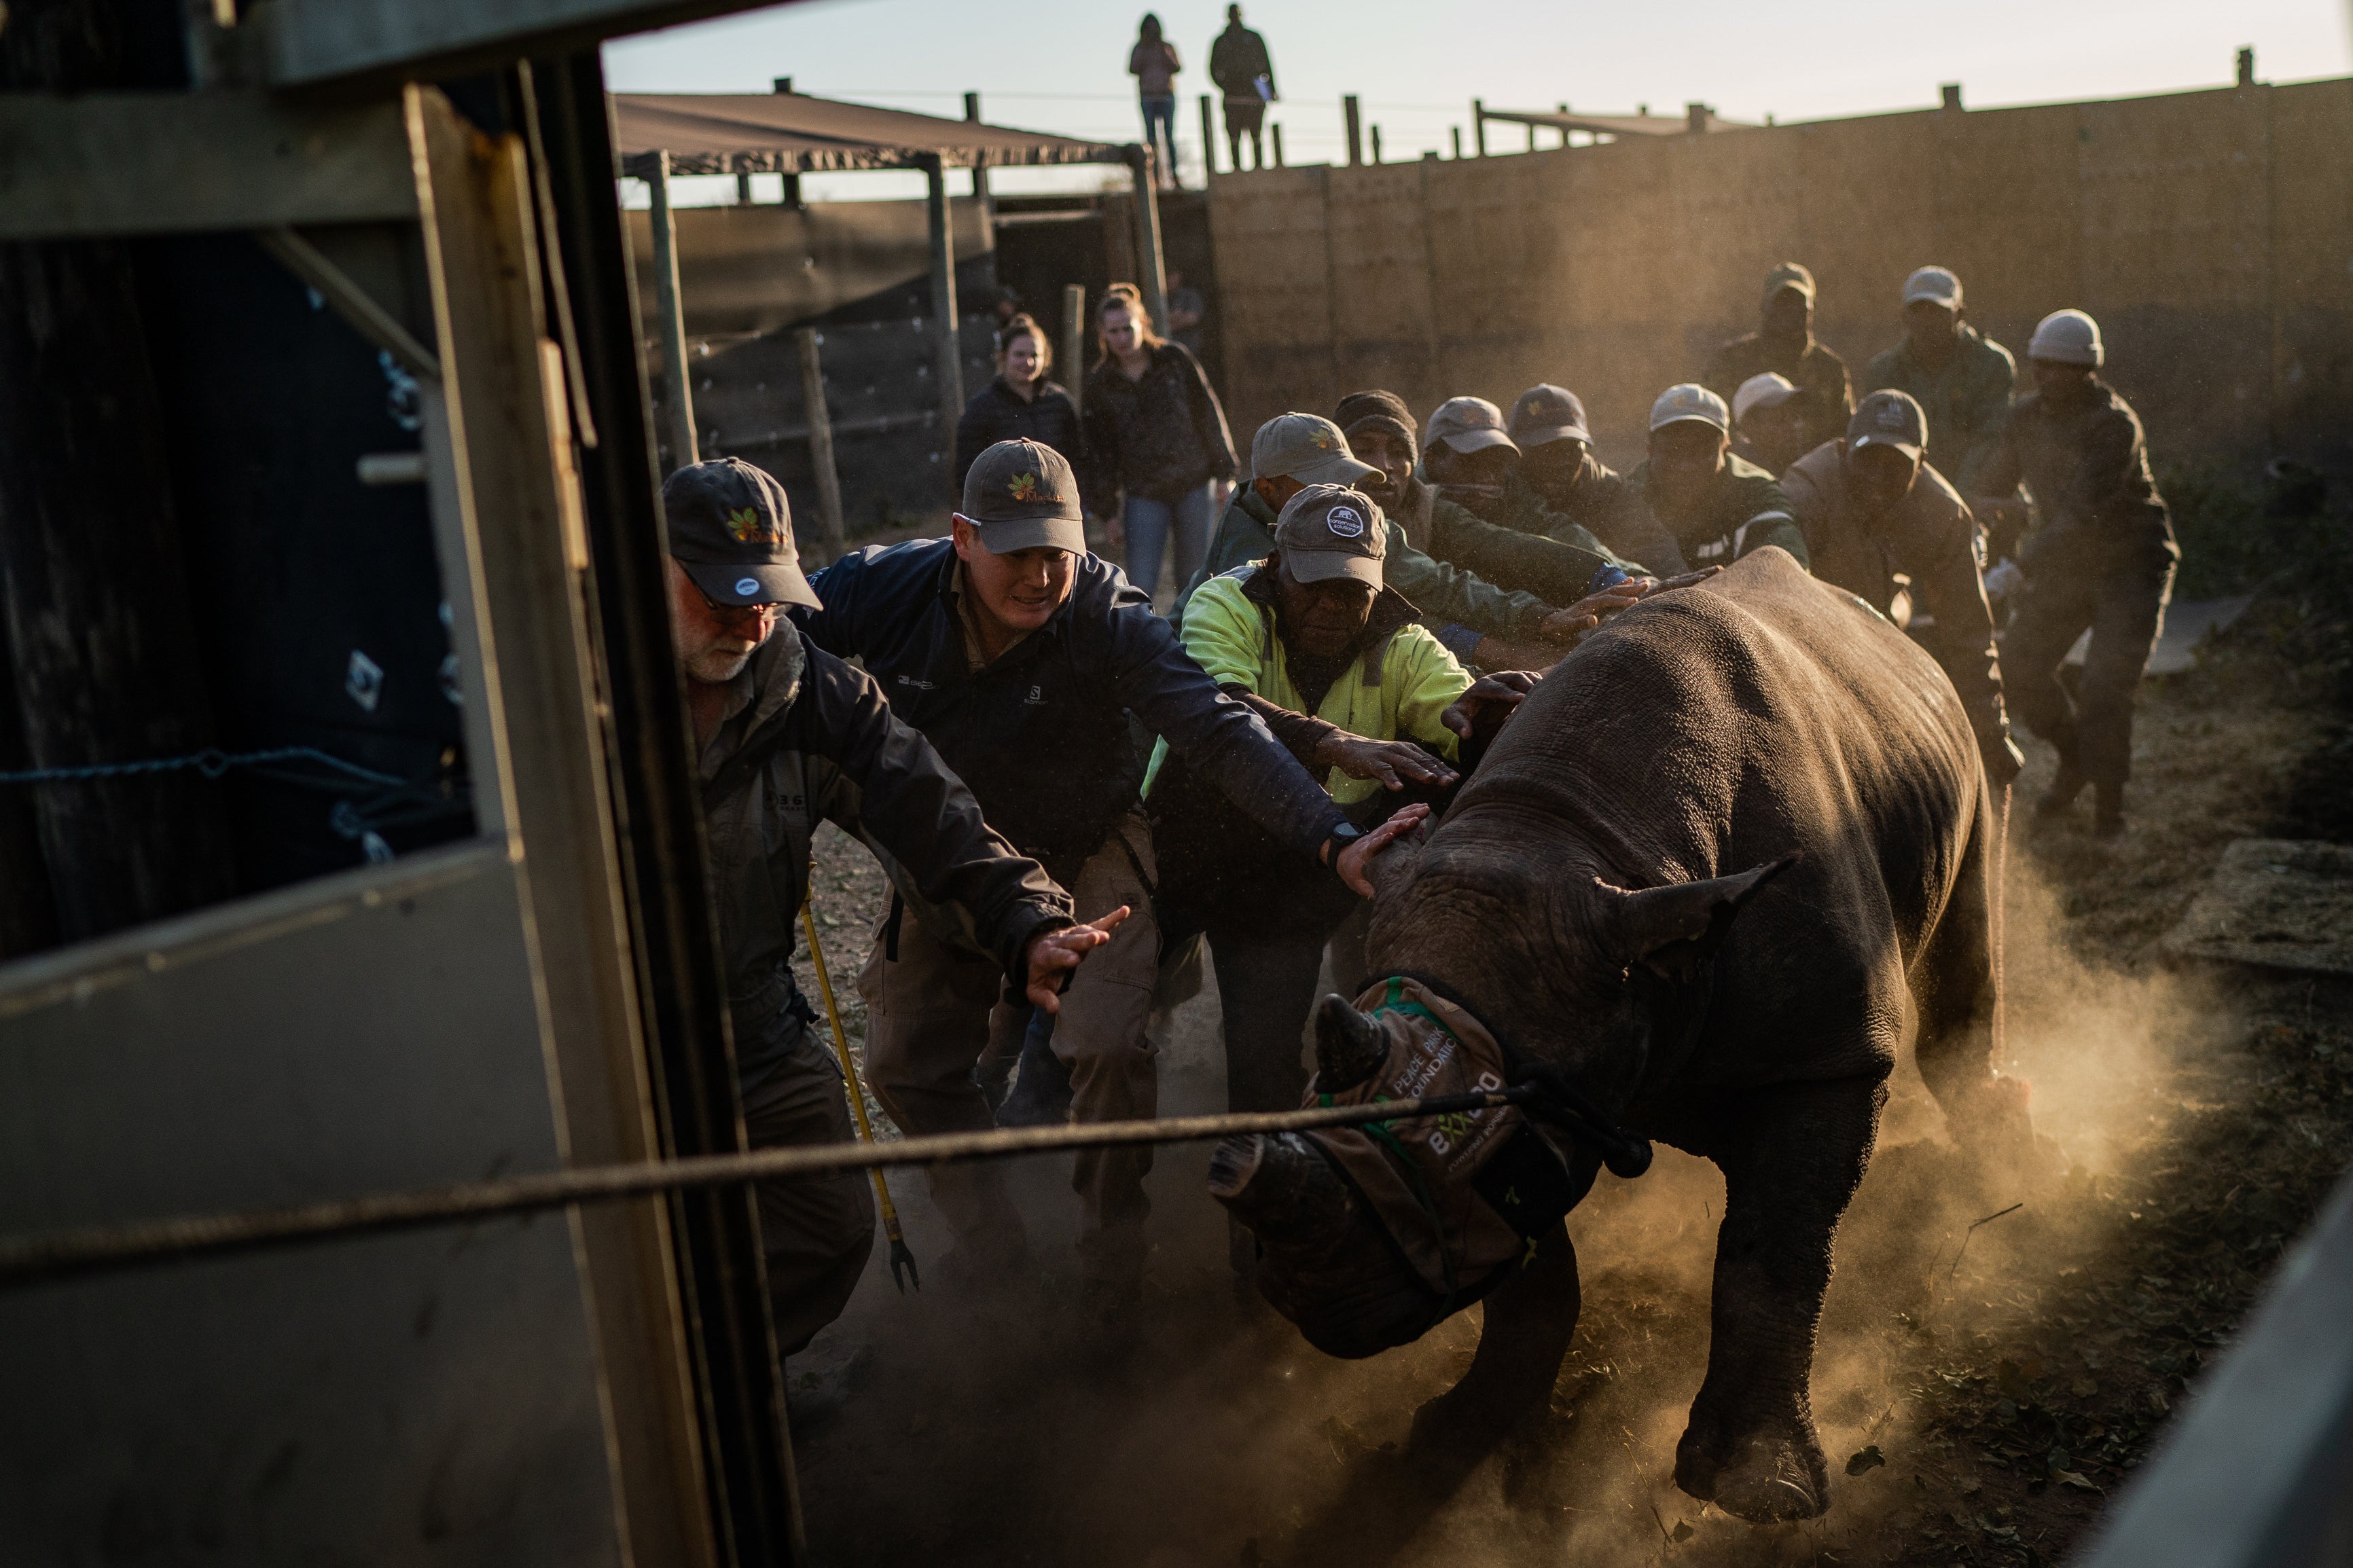 A team of conservationists and park rangers guide one of the endangered black rhinos into a boma after it was sedated